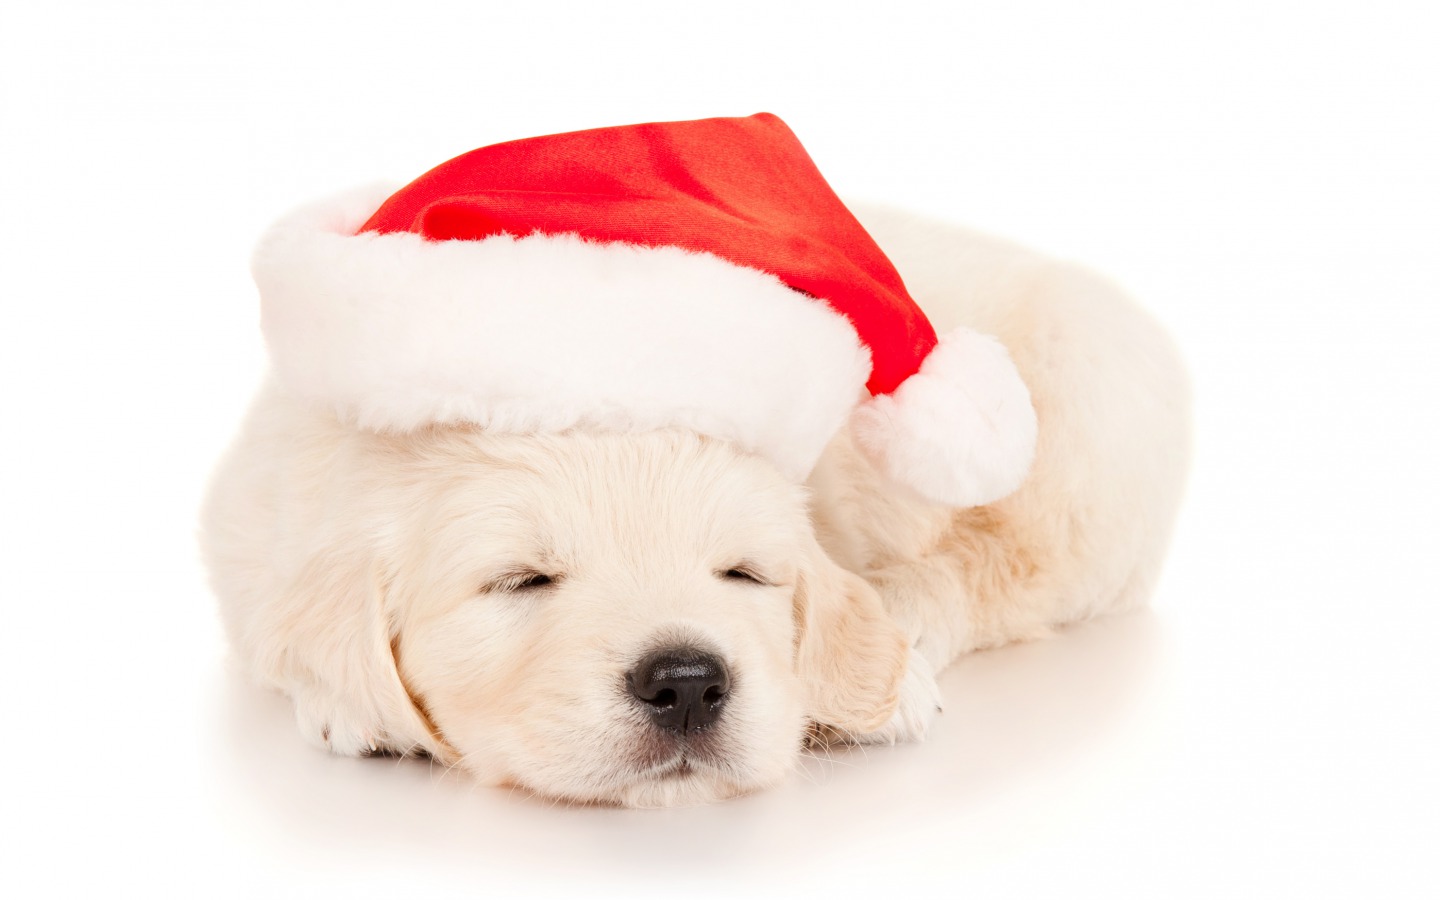 Wishes Gif Wallpaper Cute Christmas Puppy Sleeping With Hat